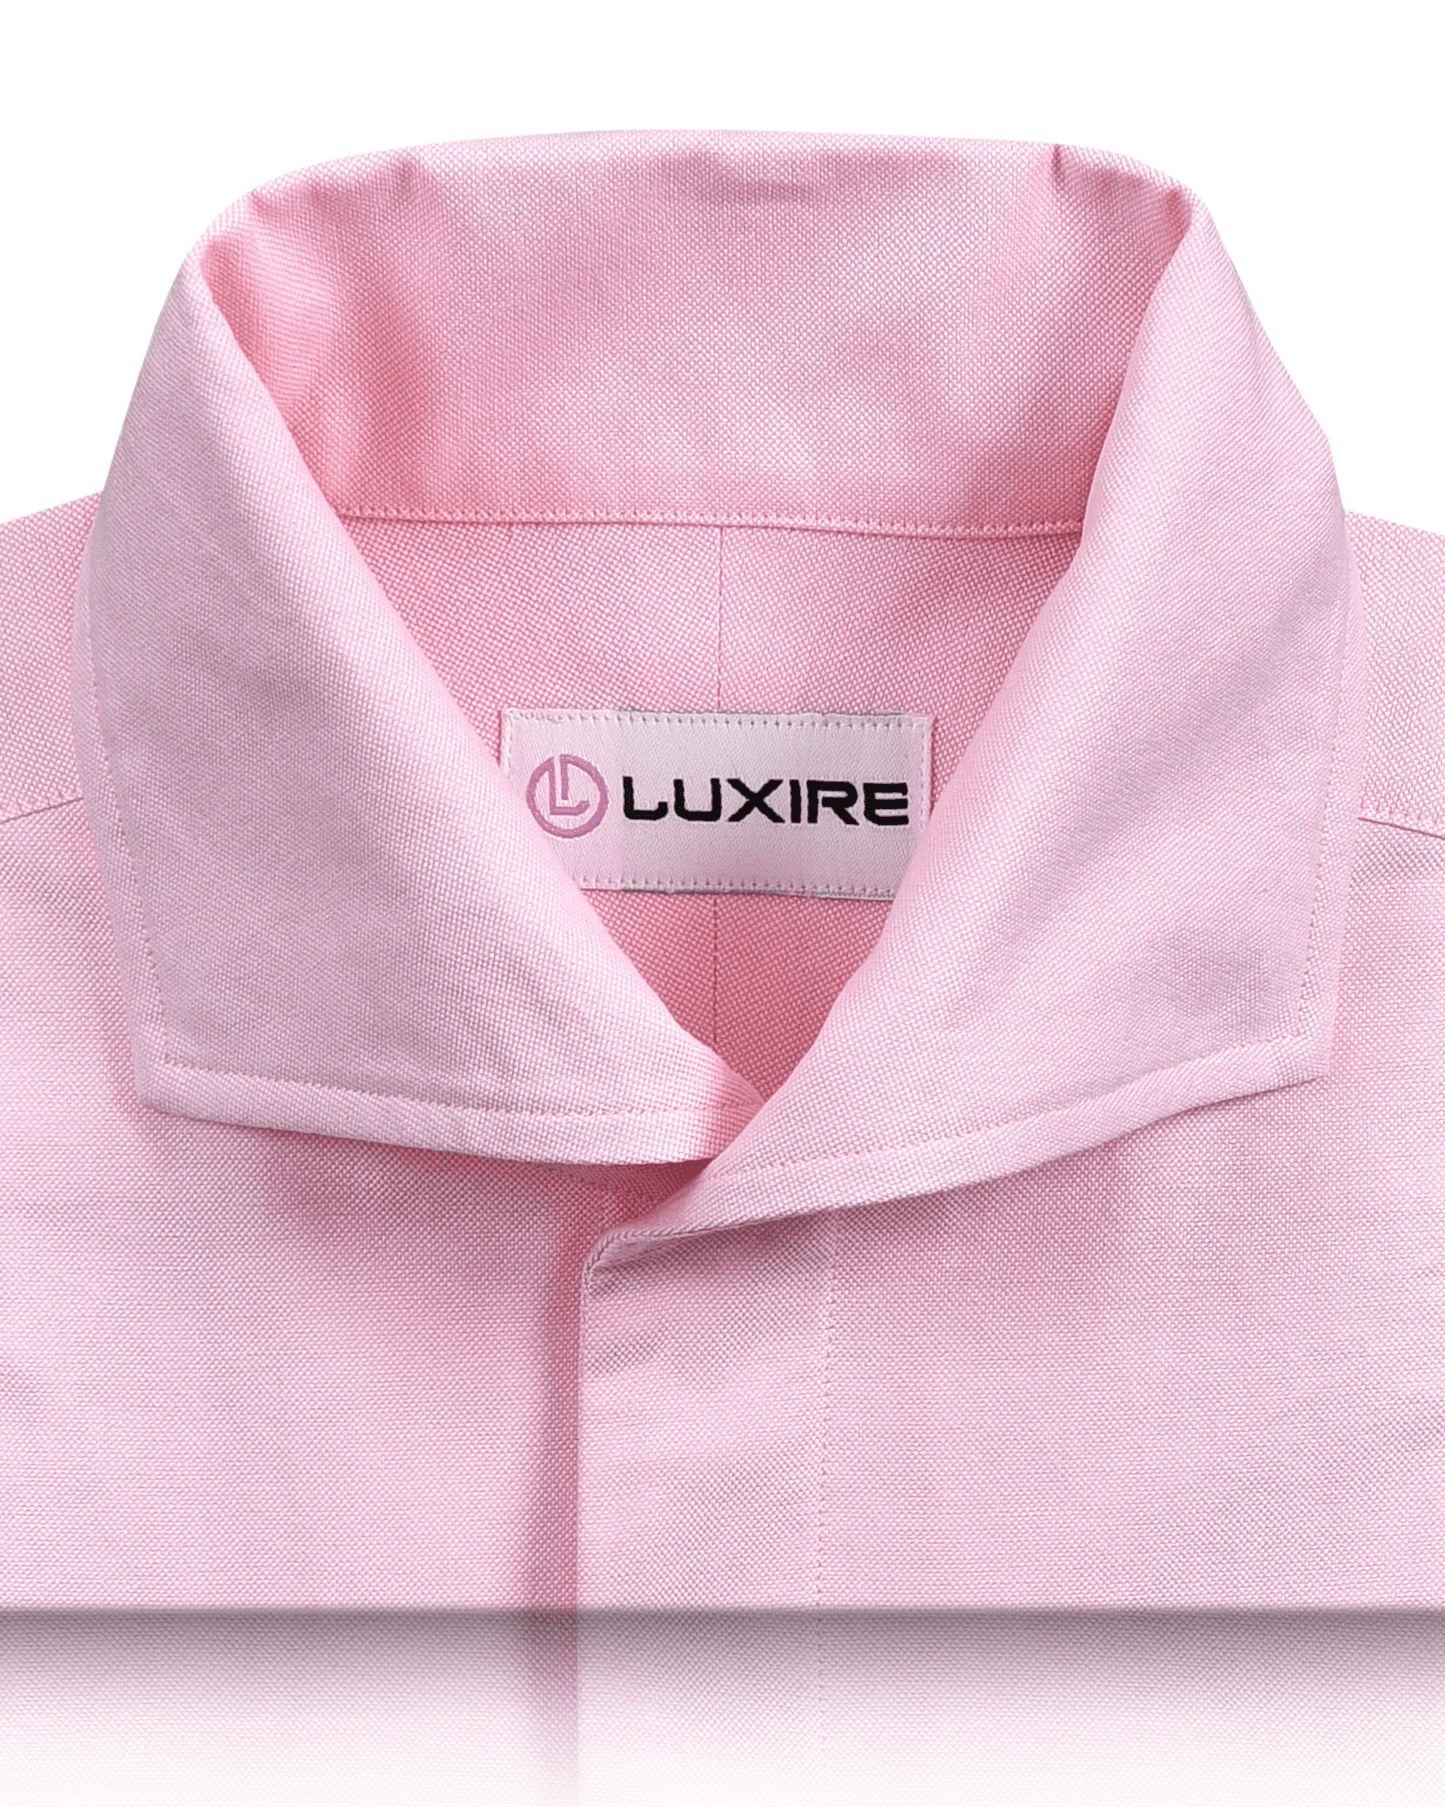 Collar of the custom oxford shirt for men by Luxire in pink